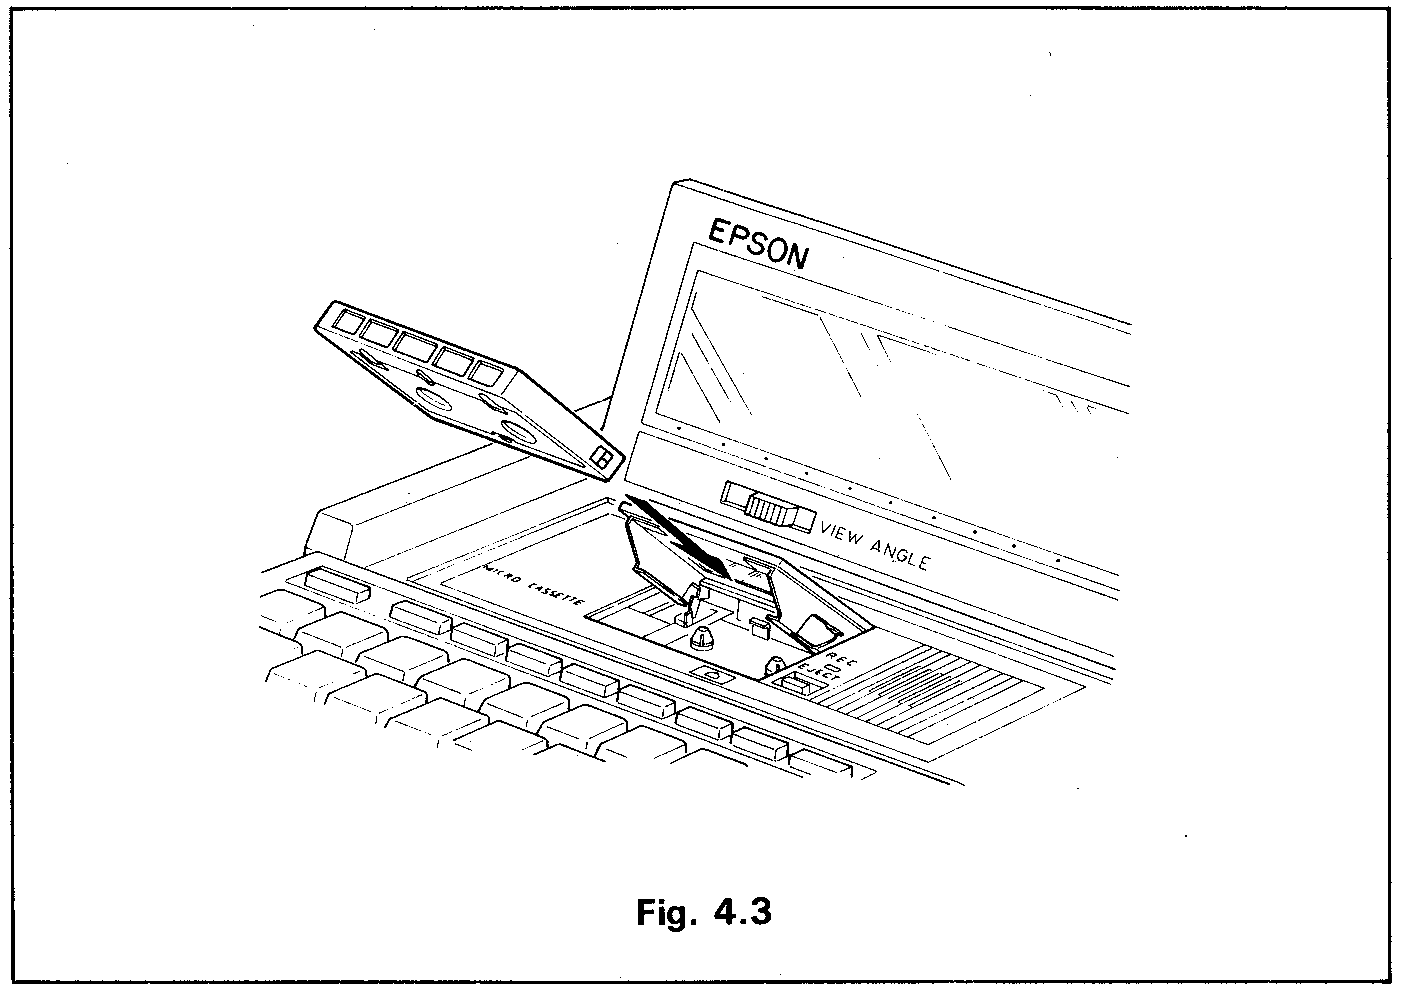 Fig. 4.3 - Inserting a microcassette